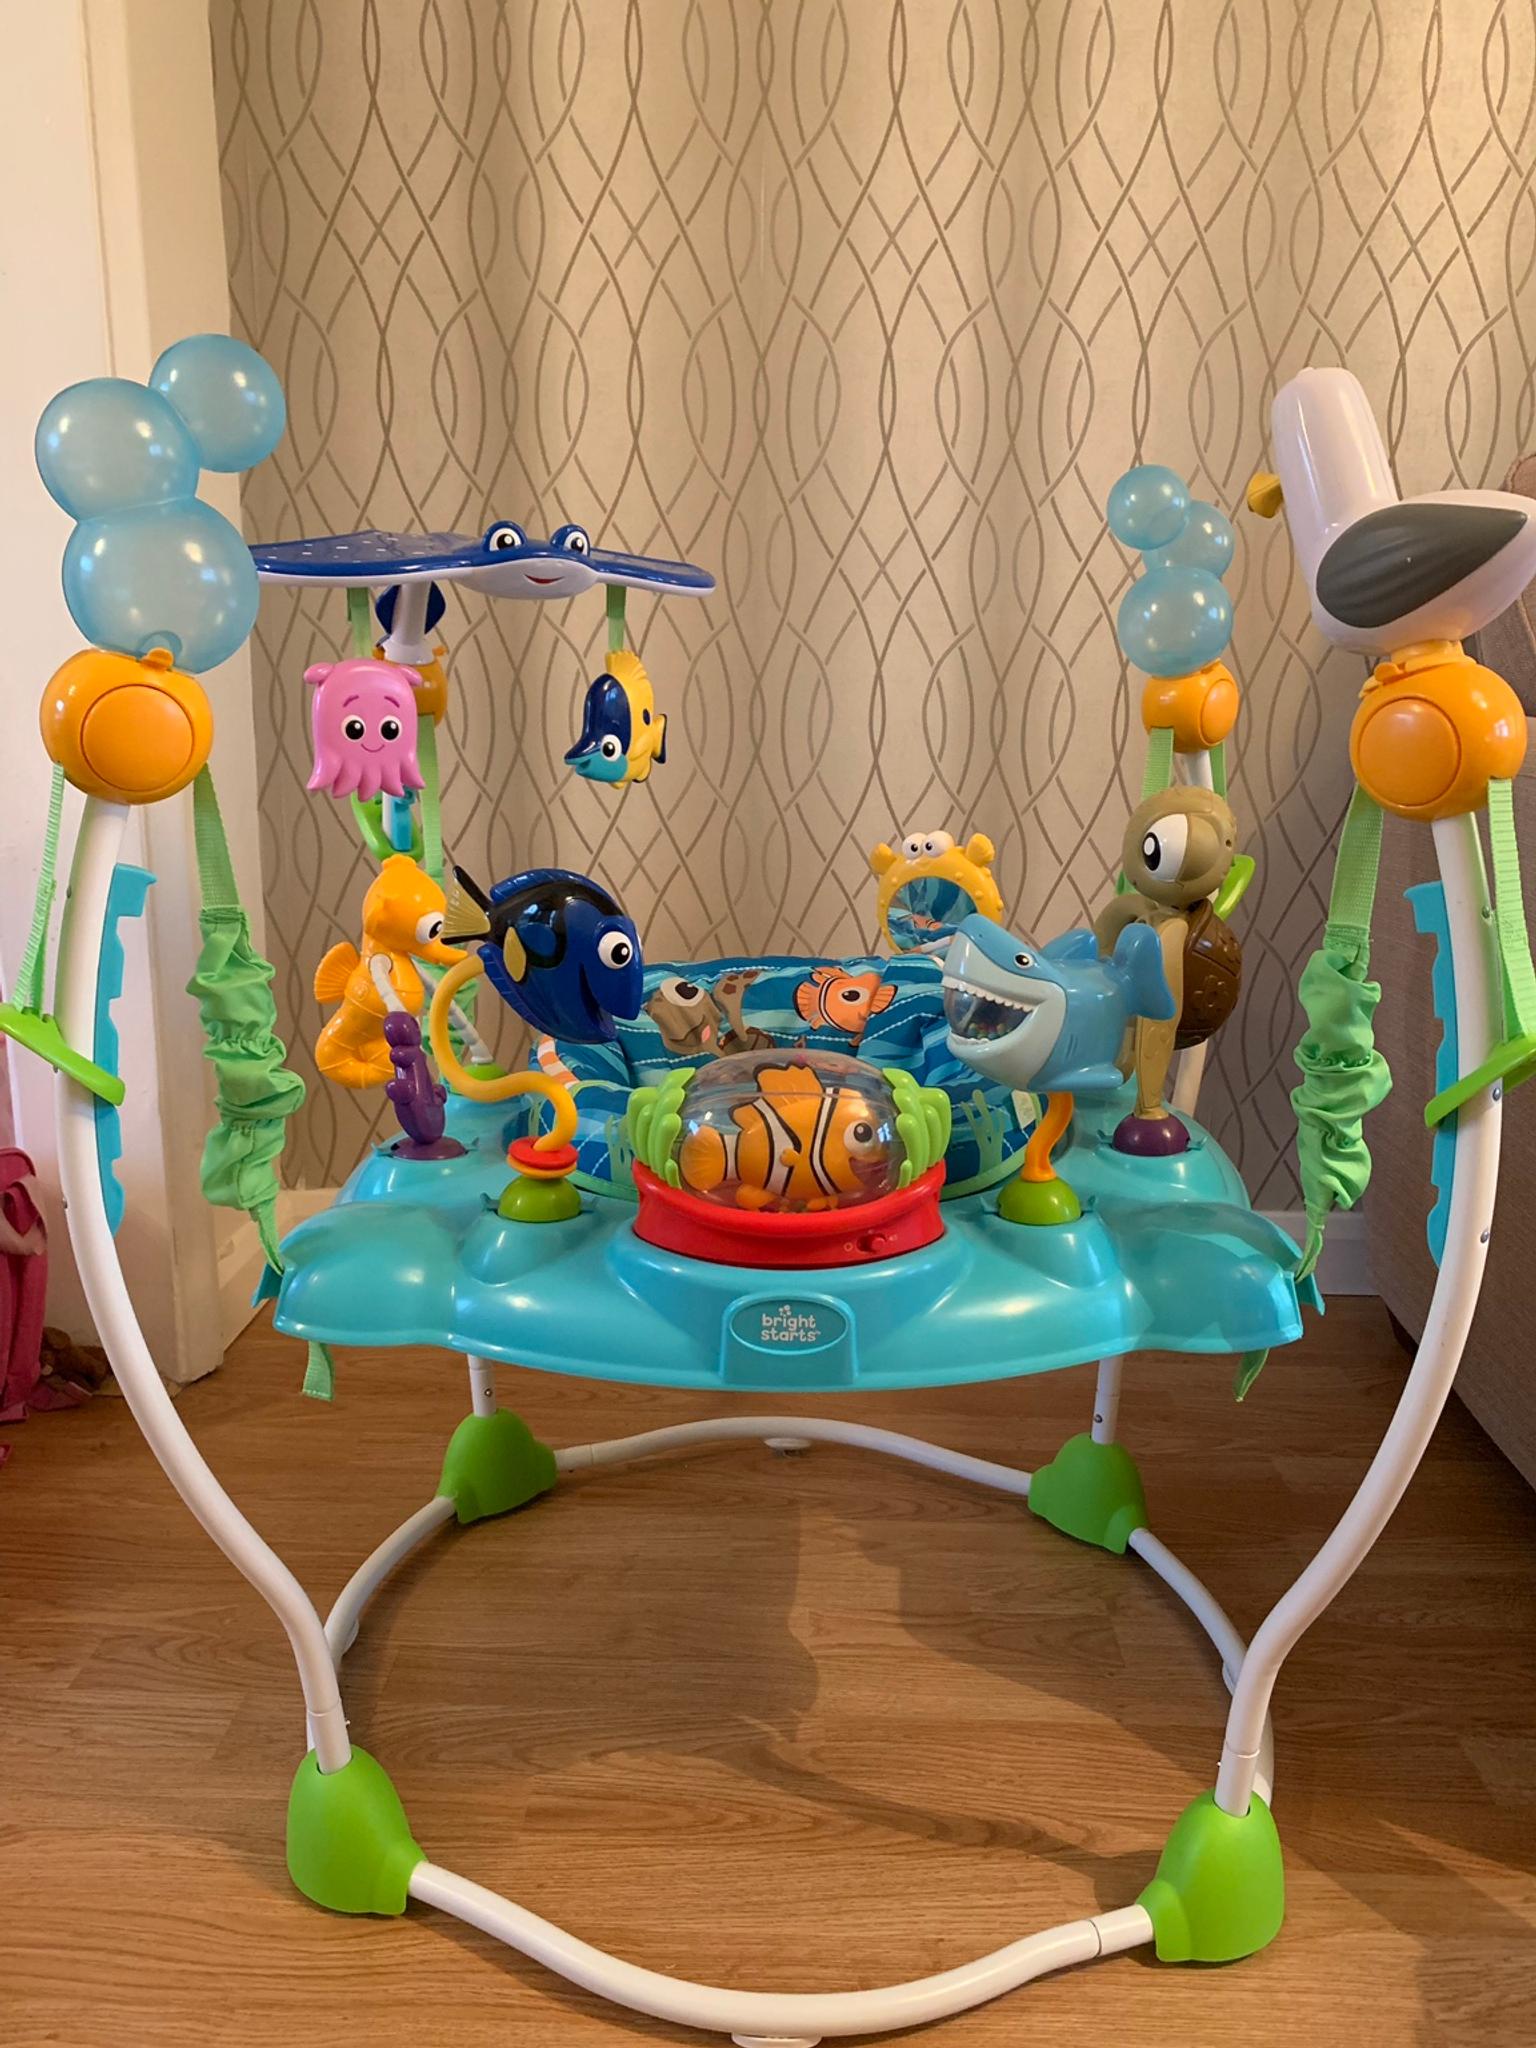 finding dory jumperoo